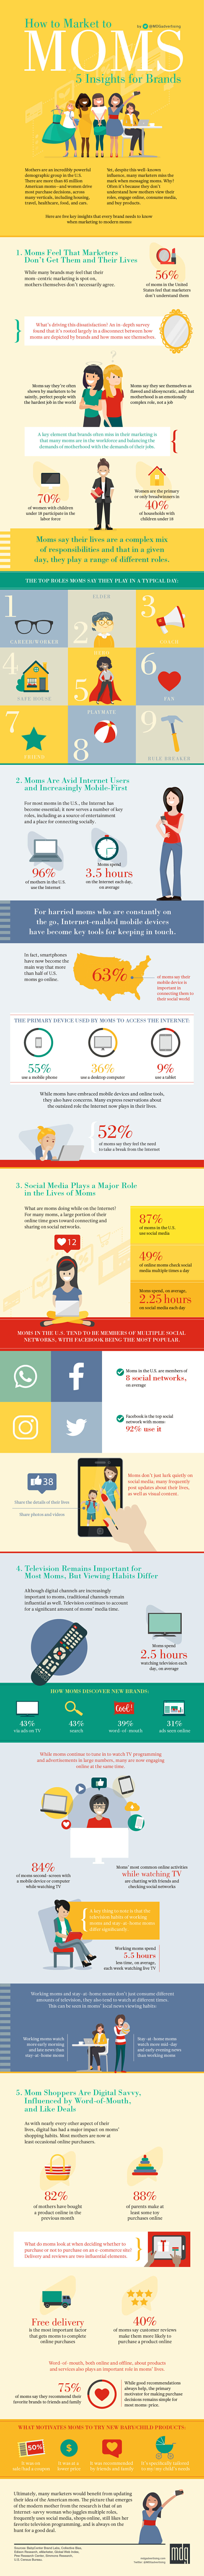 How to Market to Moms: 5 Insights for Brands [Infographic]